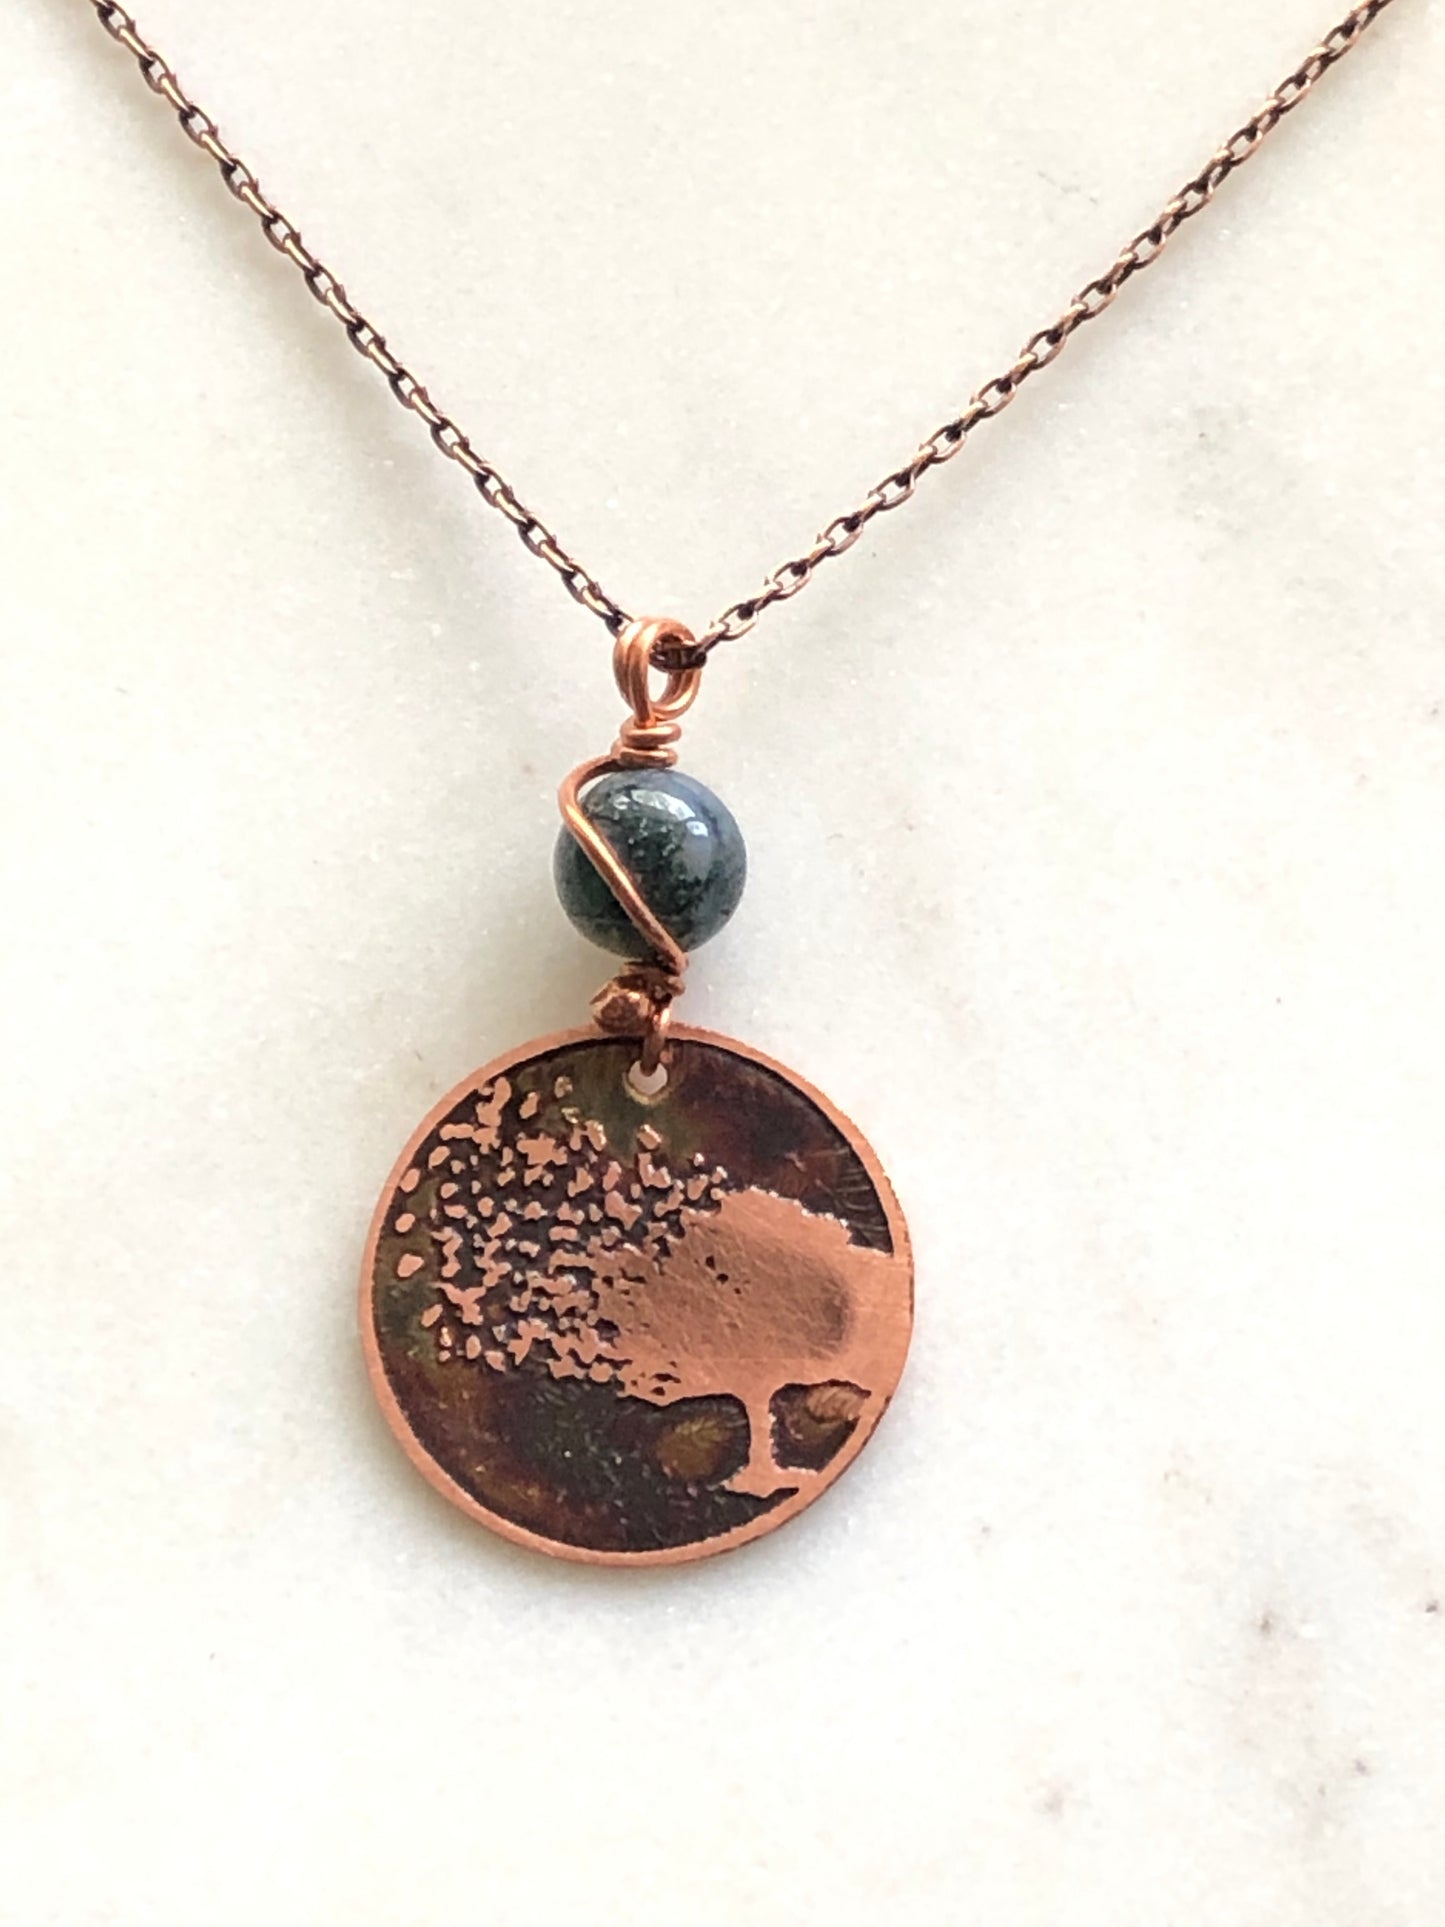 Acid etched copper blowing tree necklace with moss agate